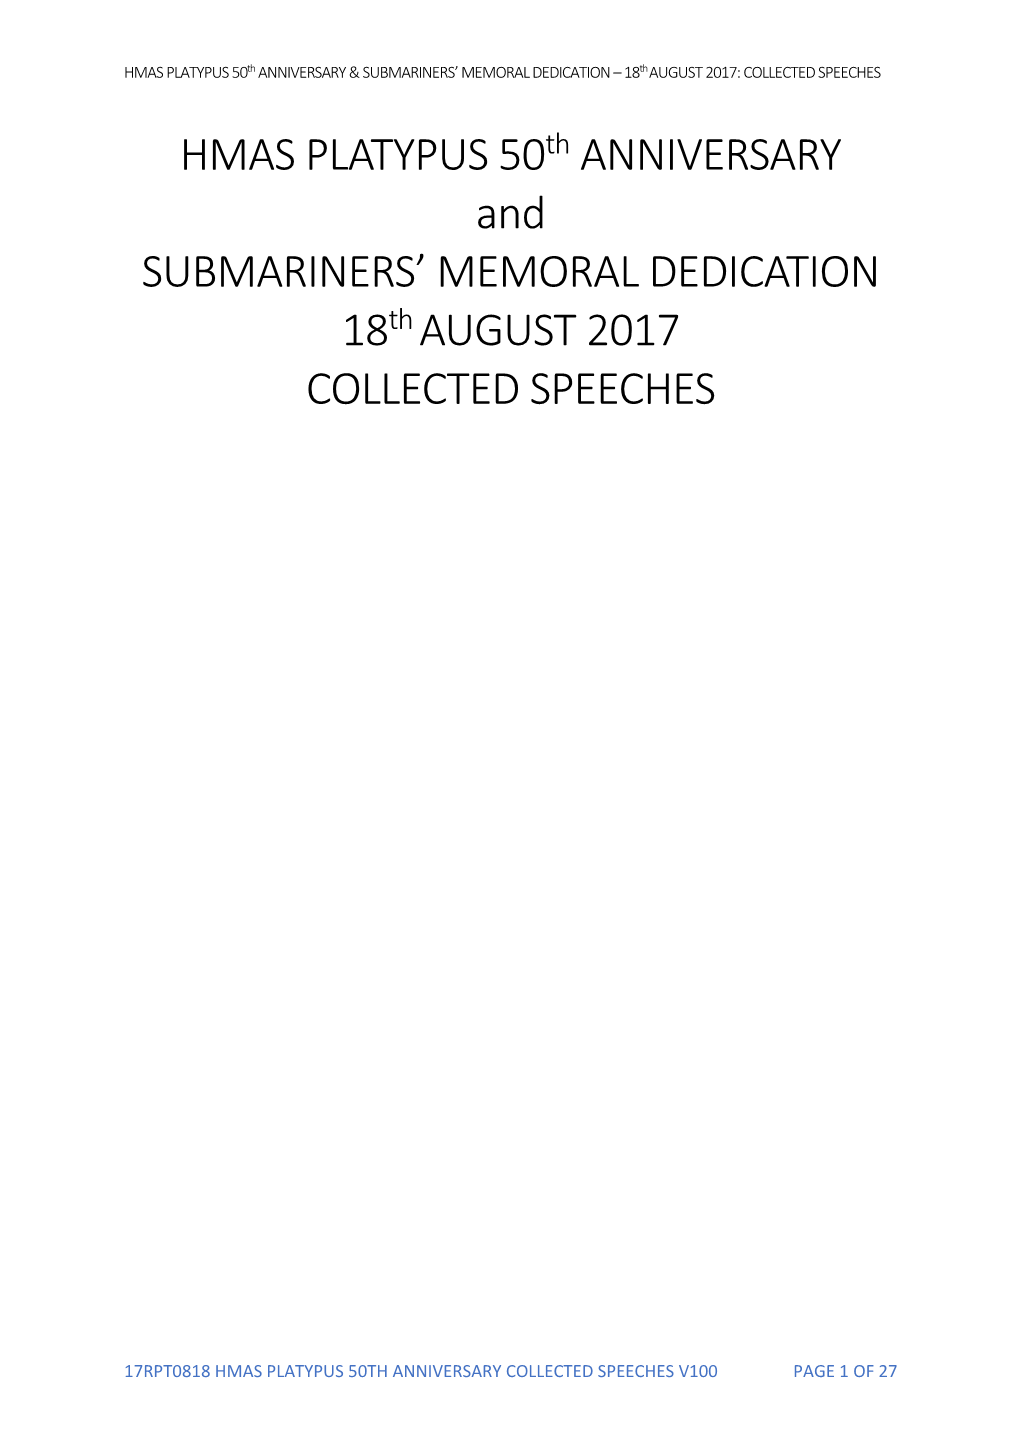 HMAS PLATYPUS 50Th ANNIVERSARY and SUBMARINERS’ MEMORAL DEDICATION 18Th AUGUST 2017 COLLECTED SPEECHES